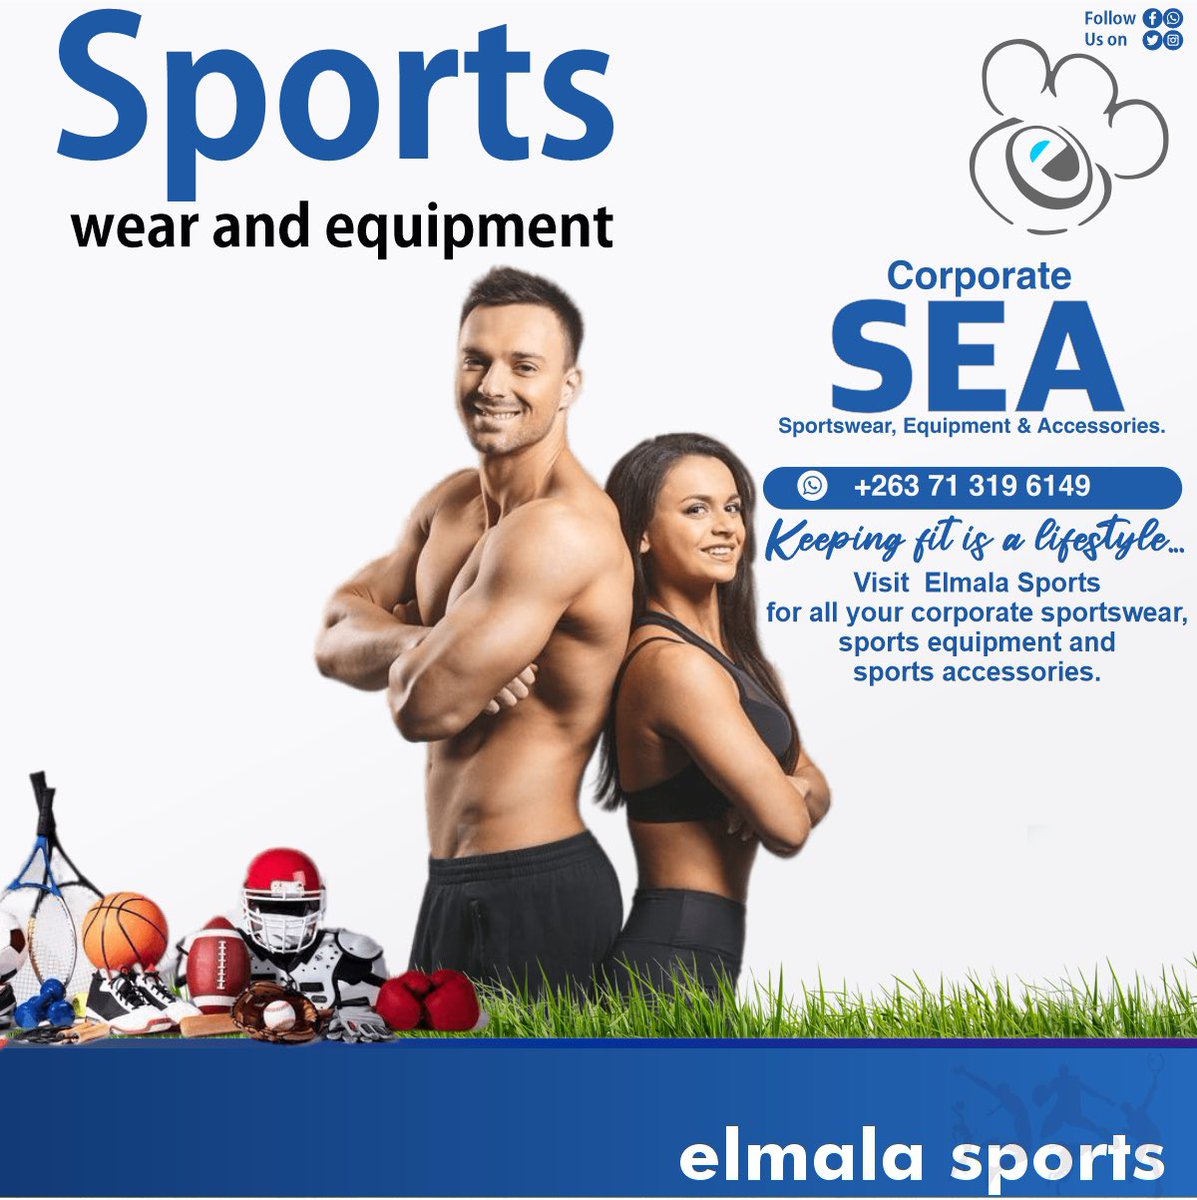 Sportswear and Sports Equipment.
Visit Elmala Sports today and view our lastest sportswear collection.

#sportskit #buylocal #sportsaccessories #sportwearstore #harare #sportequipment #teamsports #sportsequipment #elmalasports #soccerballs #sportswearshop #fortheloveofthegame